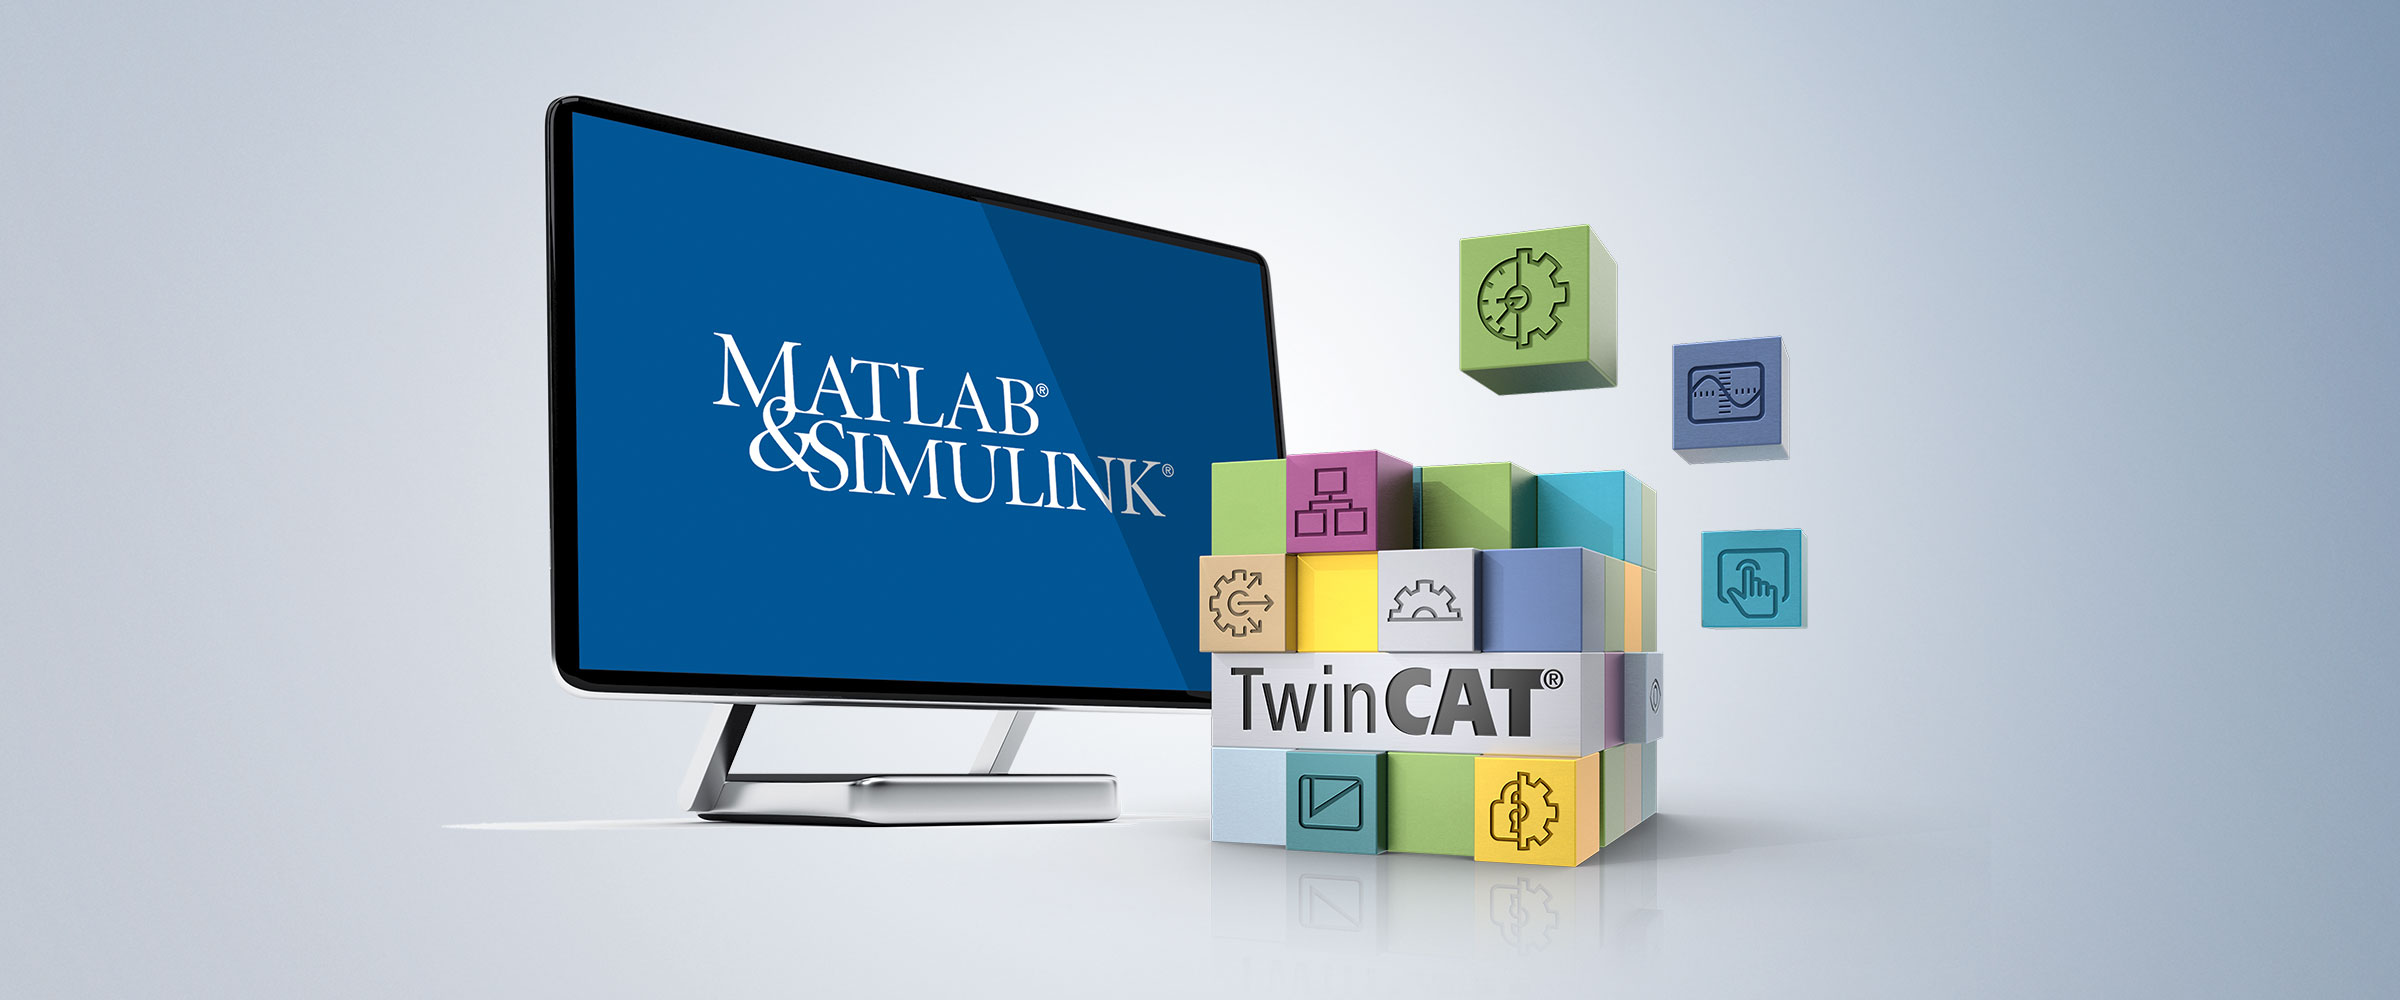 Video trailer: Customer applications MATLAB® and Simulink®